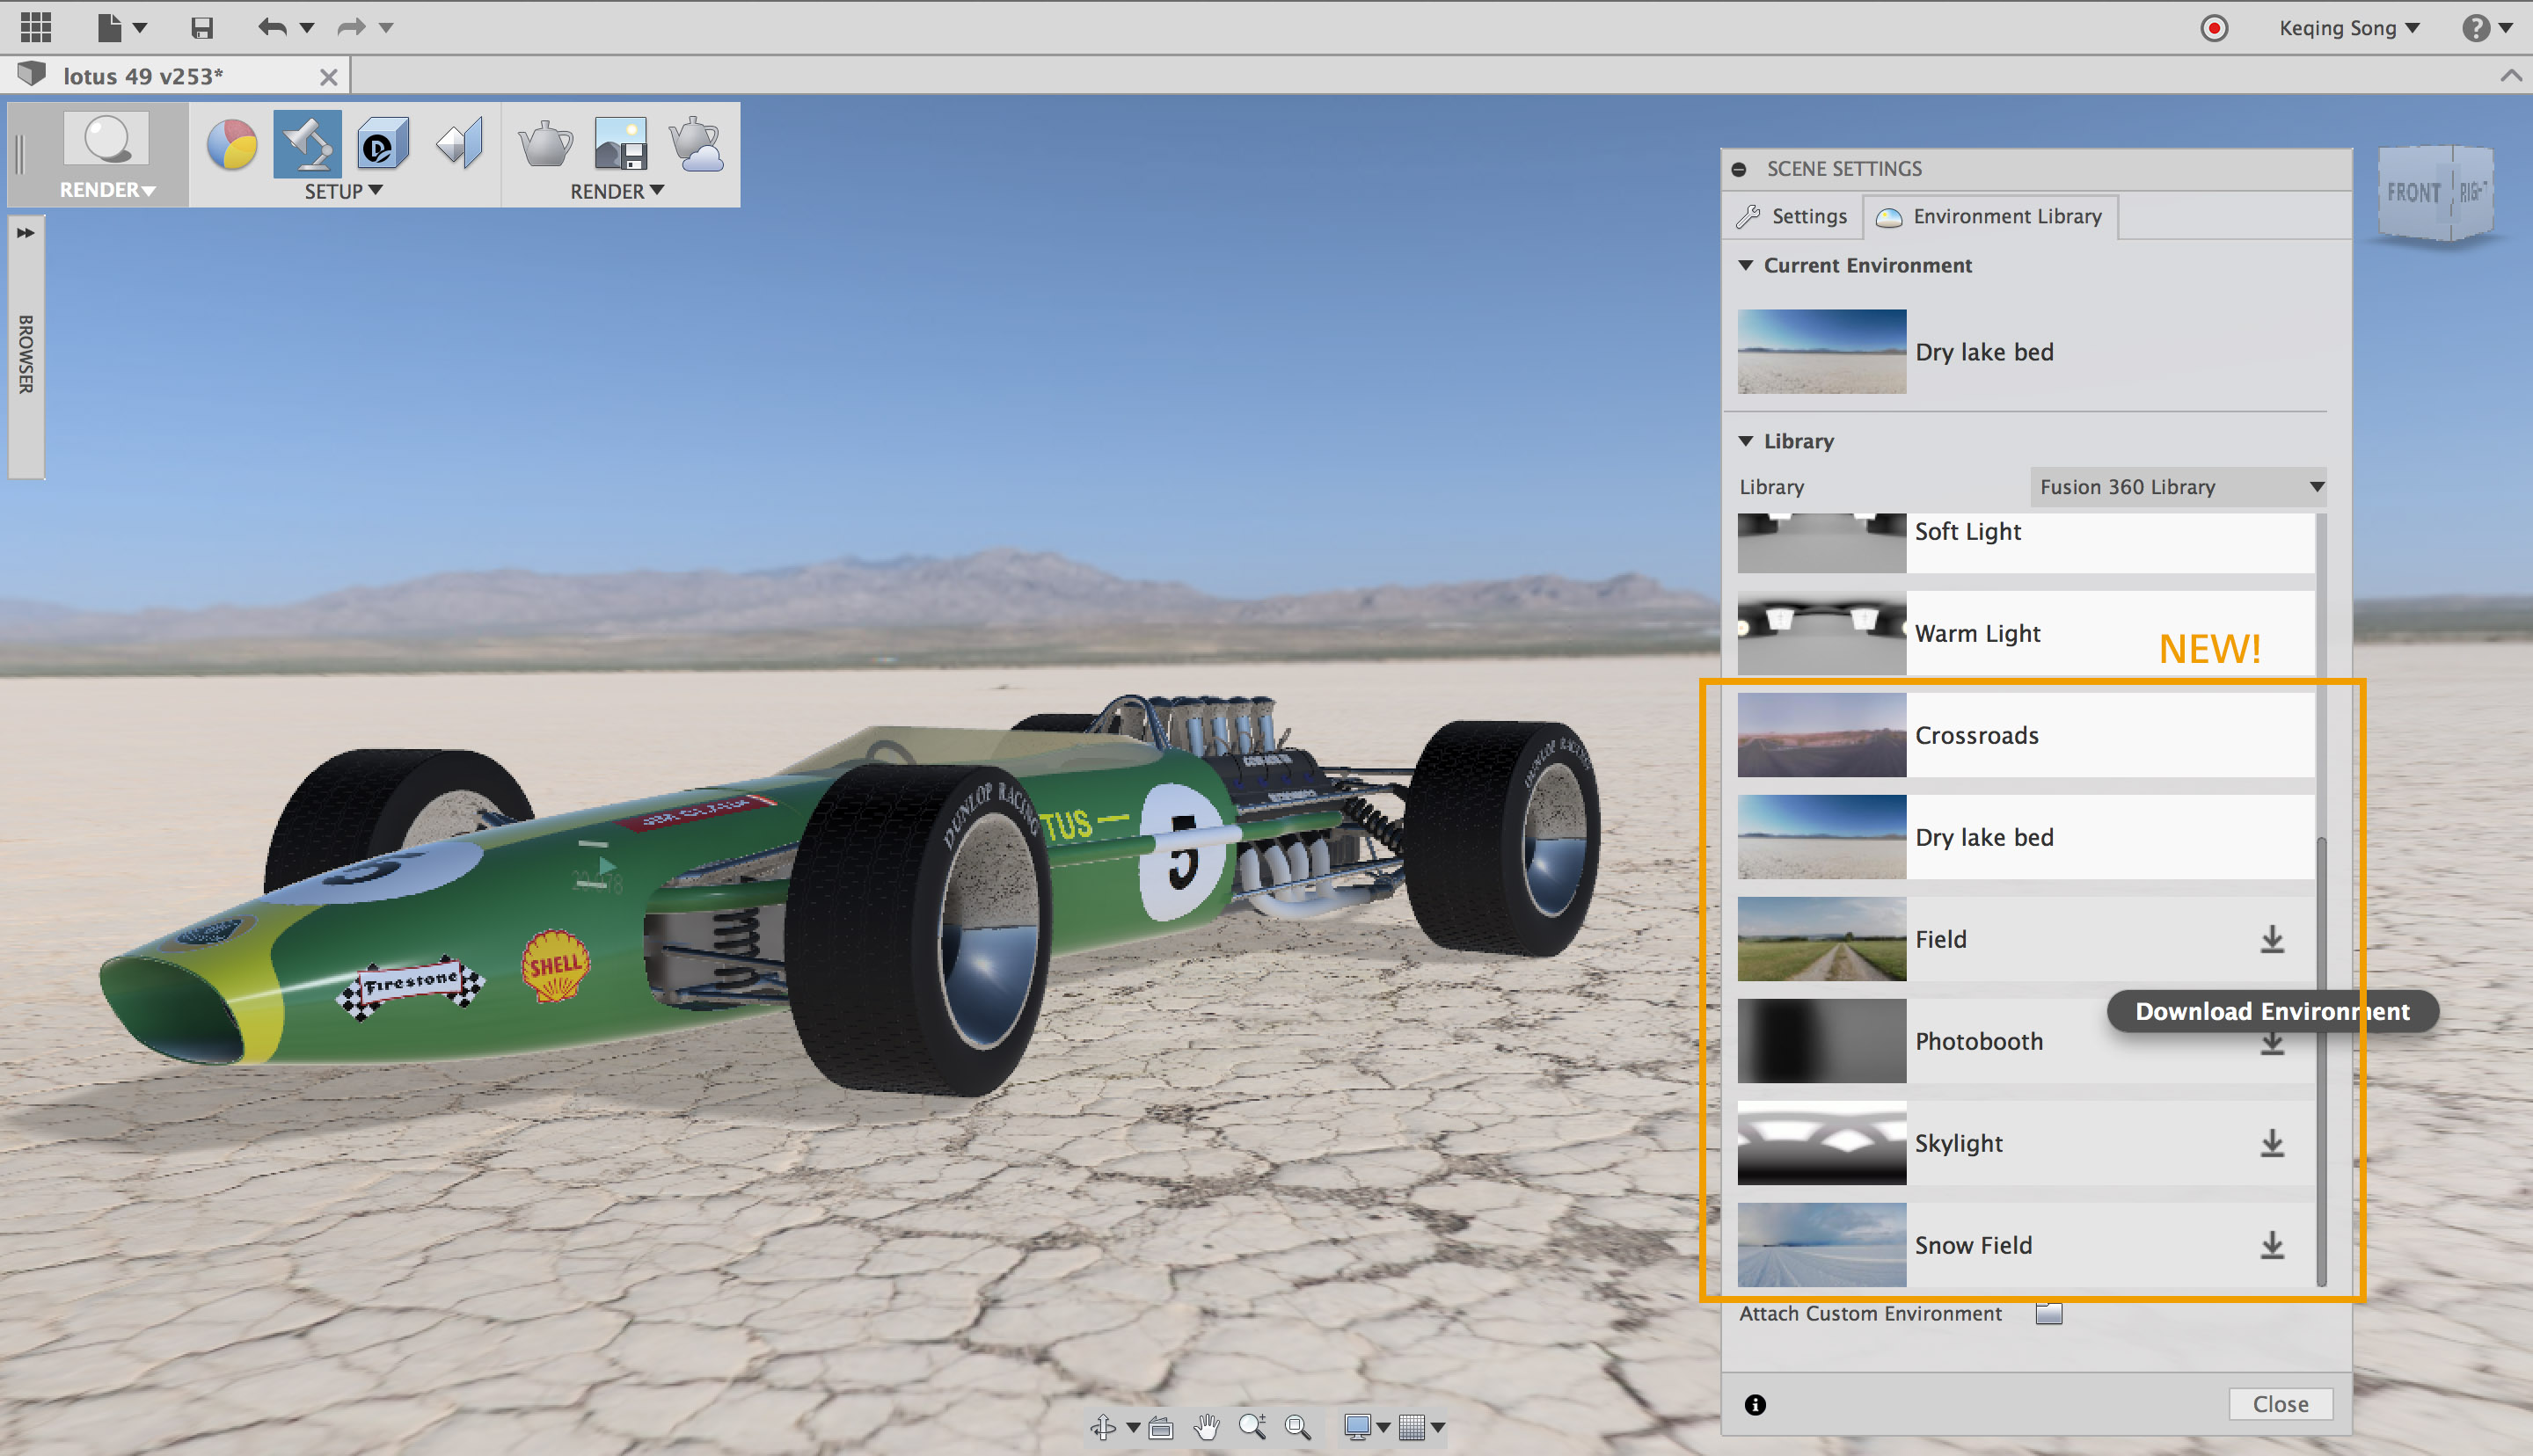 January 23, 2016 Update - What's New - Fusion 360 Blog